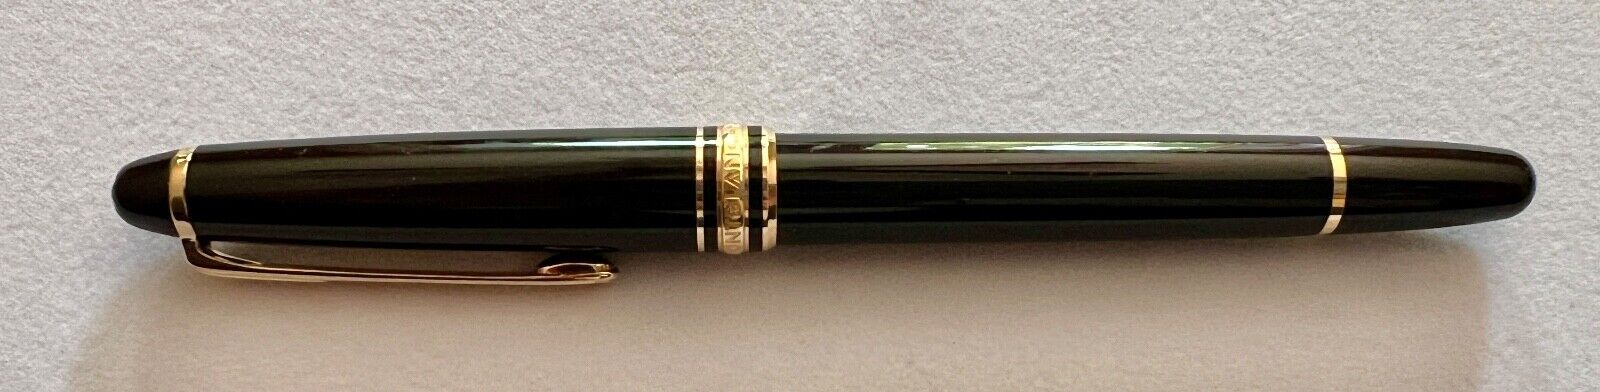 MONTBLANC Classic Meisterstück Rollerball Pen 163 - Black - NEVER USED